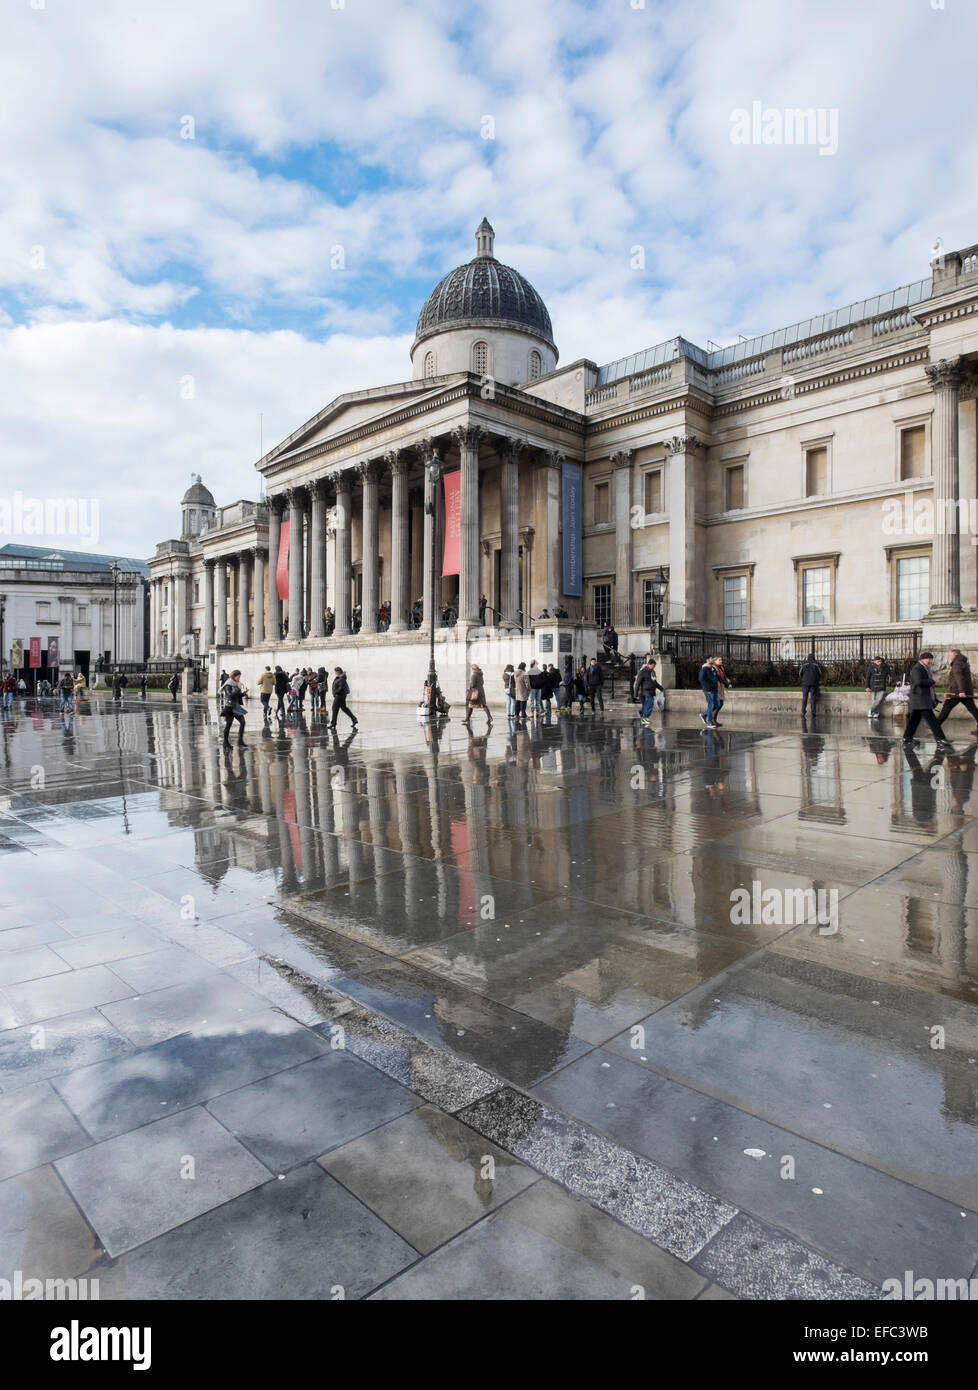 The National Gallery in Trafalgar Square, London, England Stock Photo